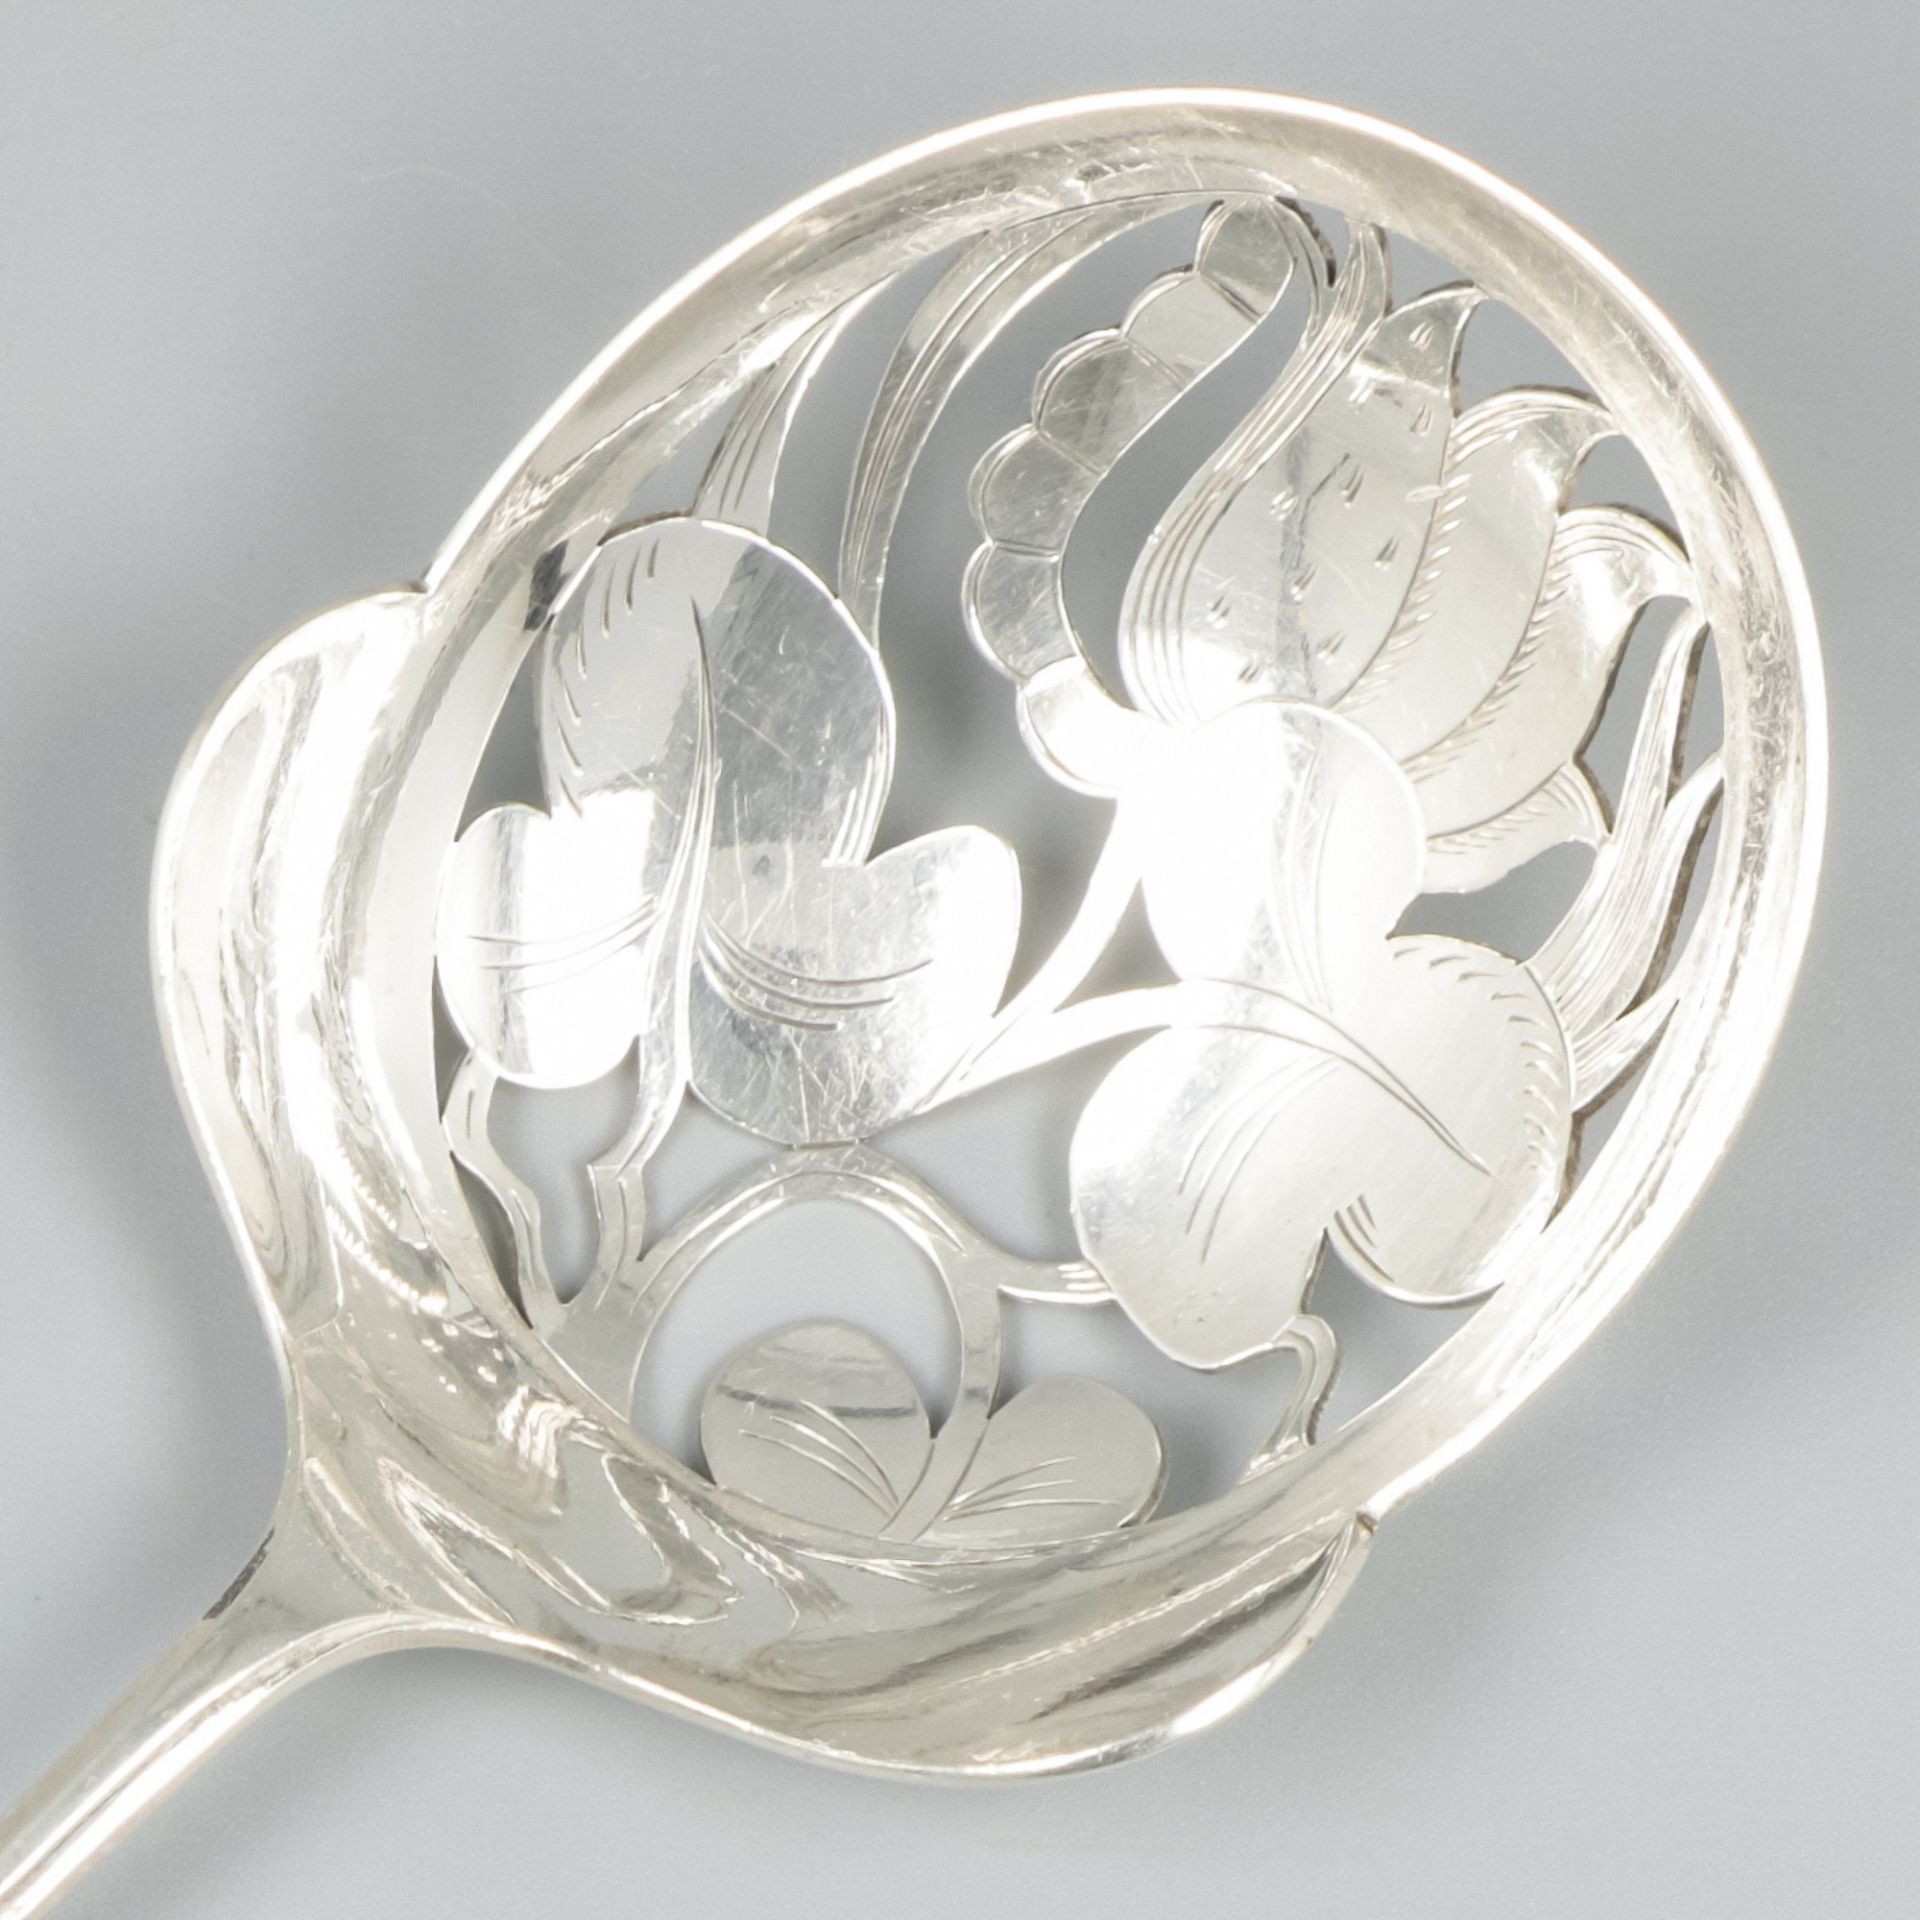 Silver strawberry spoon, model 1064 designed by Christa Ehrlich. - Image 4 of 8